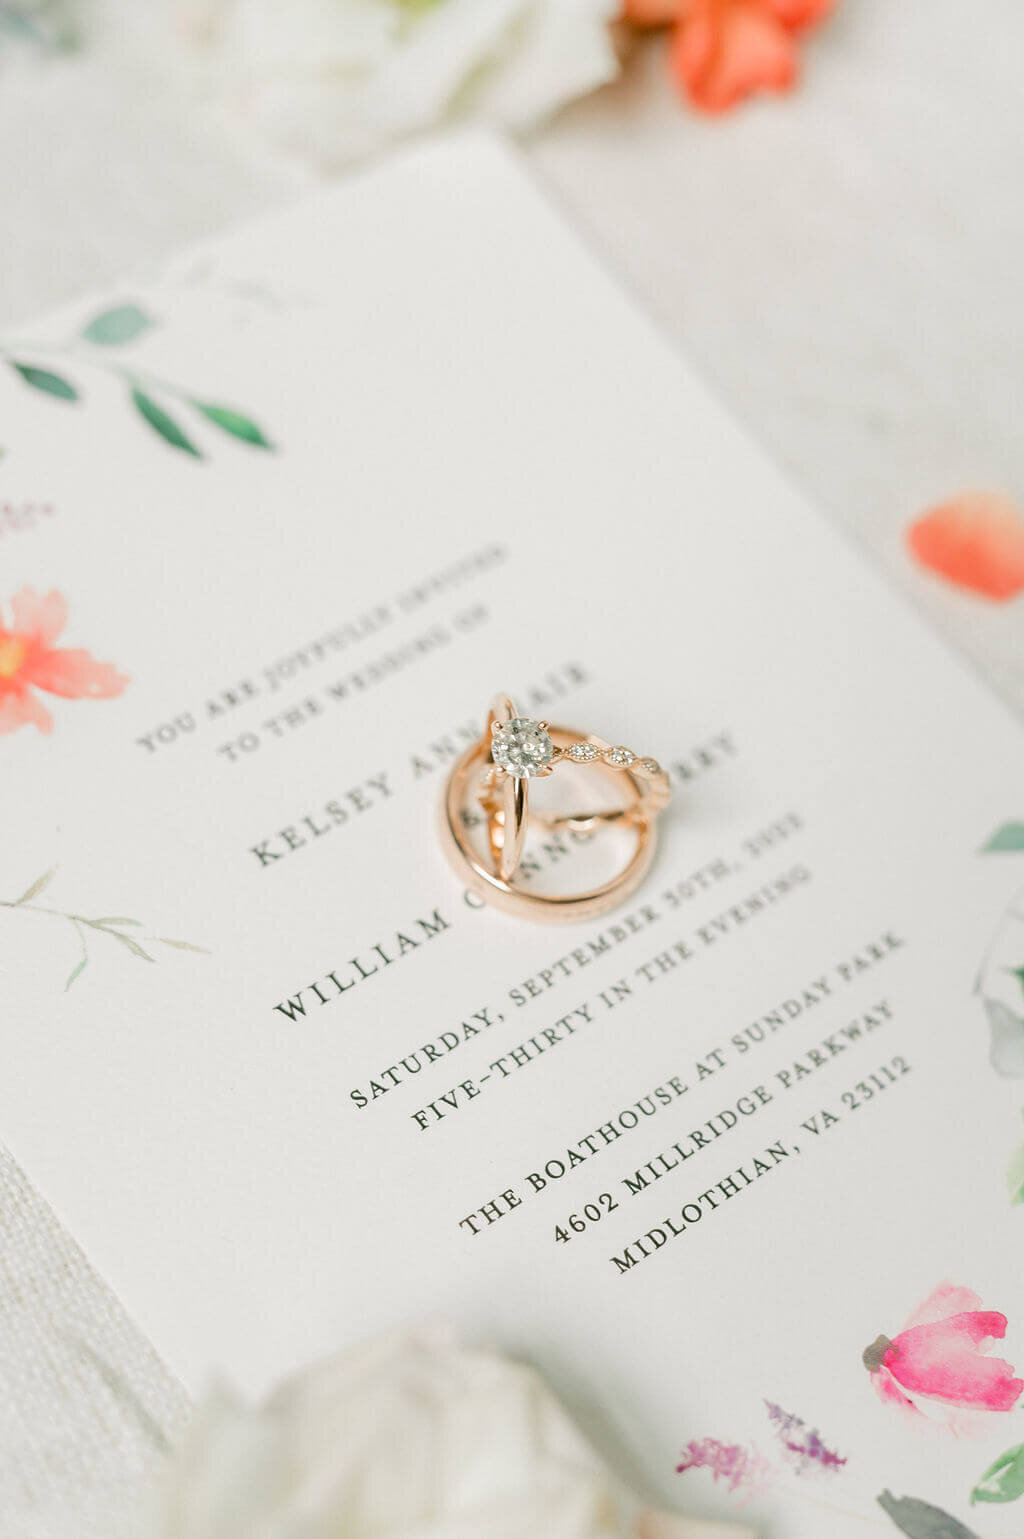 Close up image of wedding rings stacked within one another and sitting on a wedding invitation.